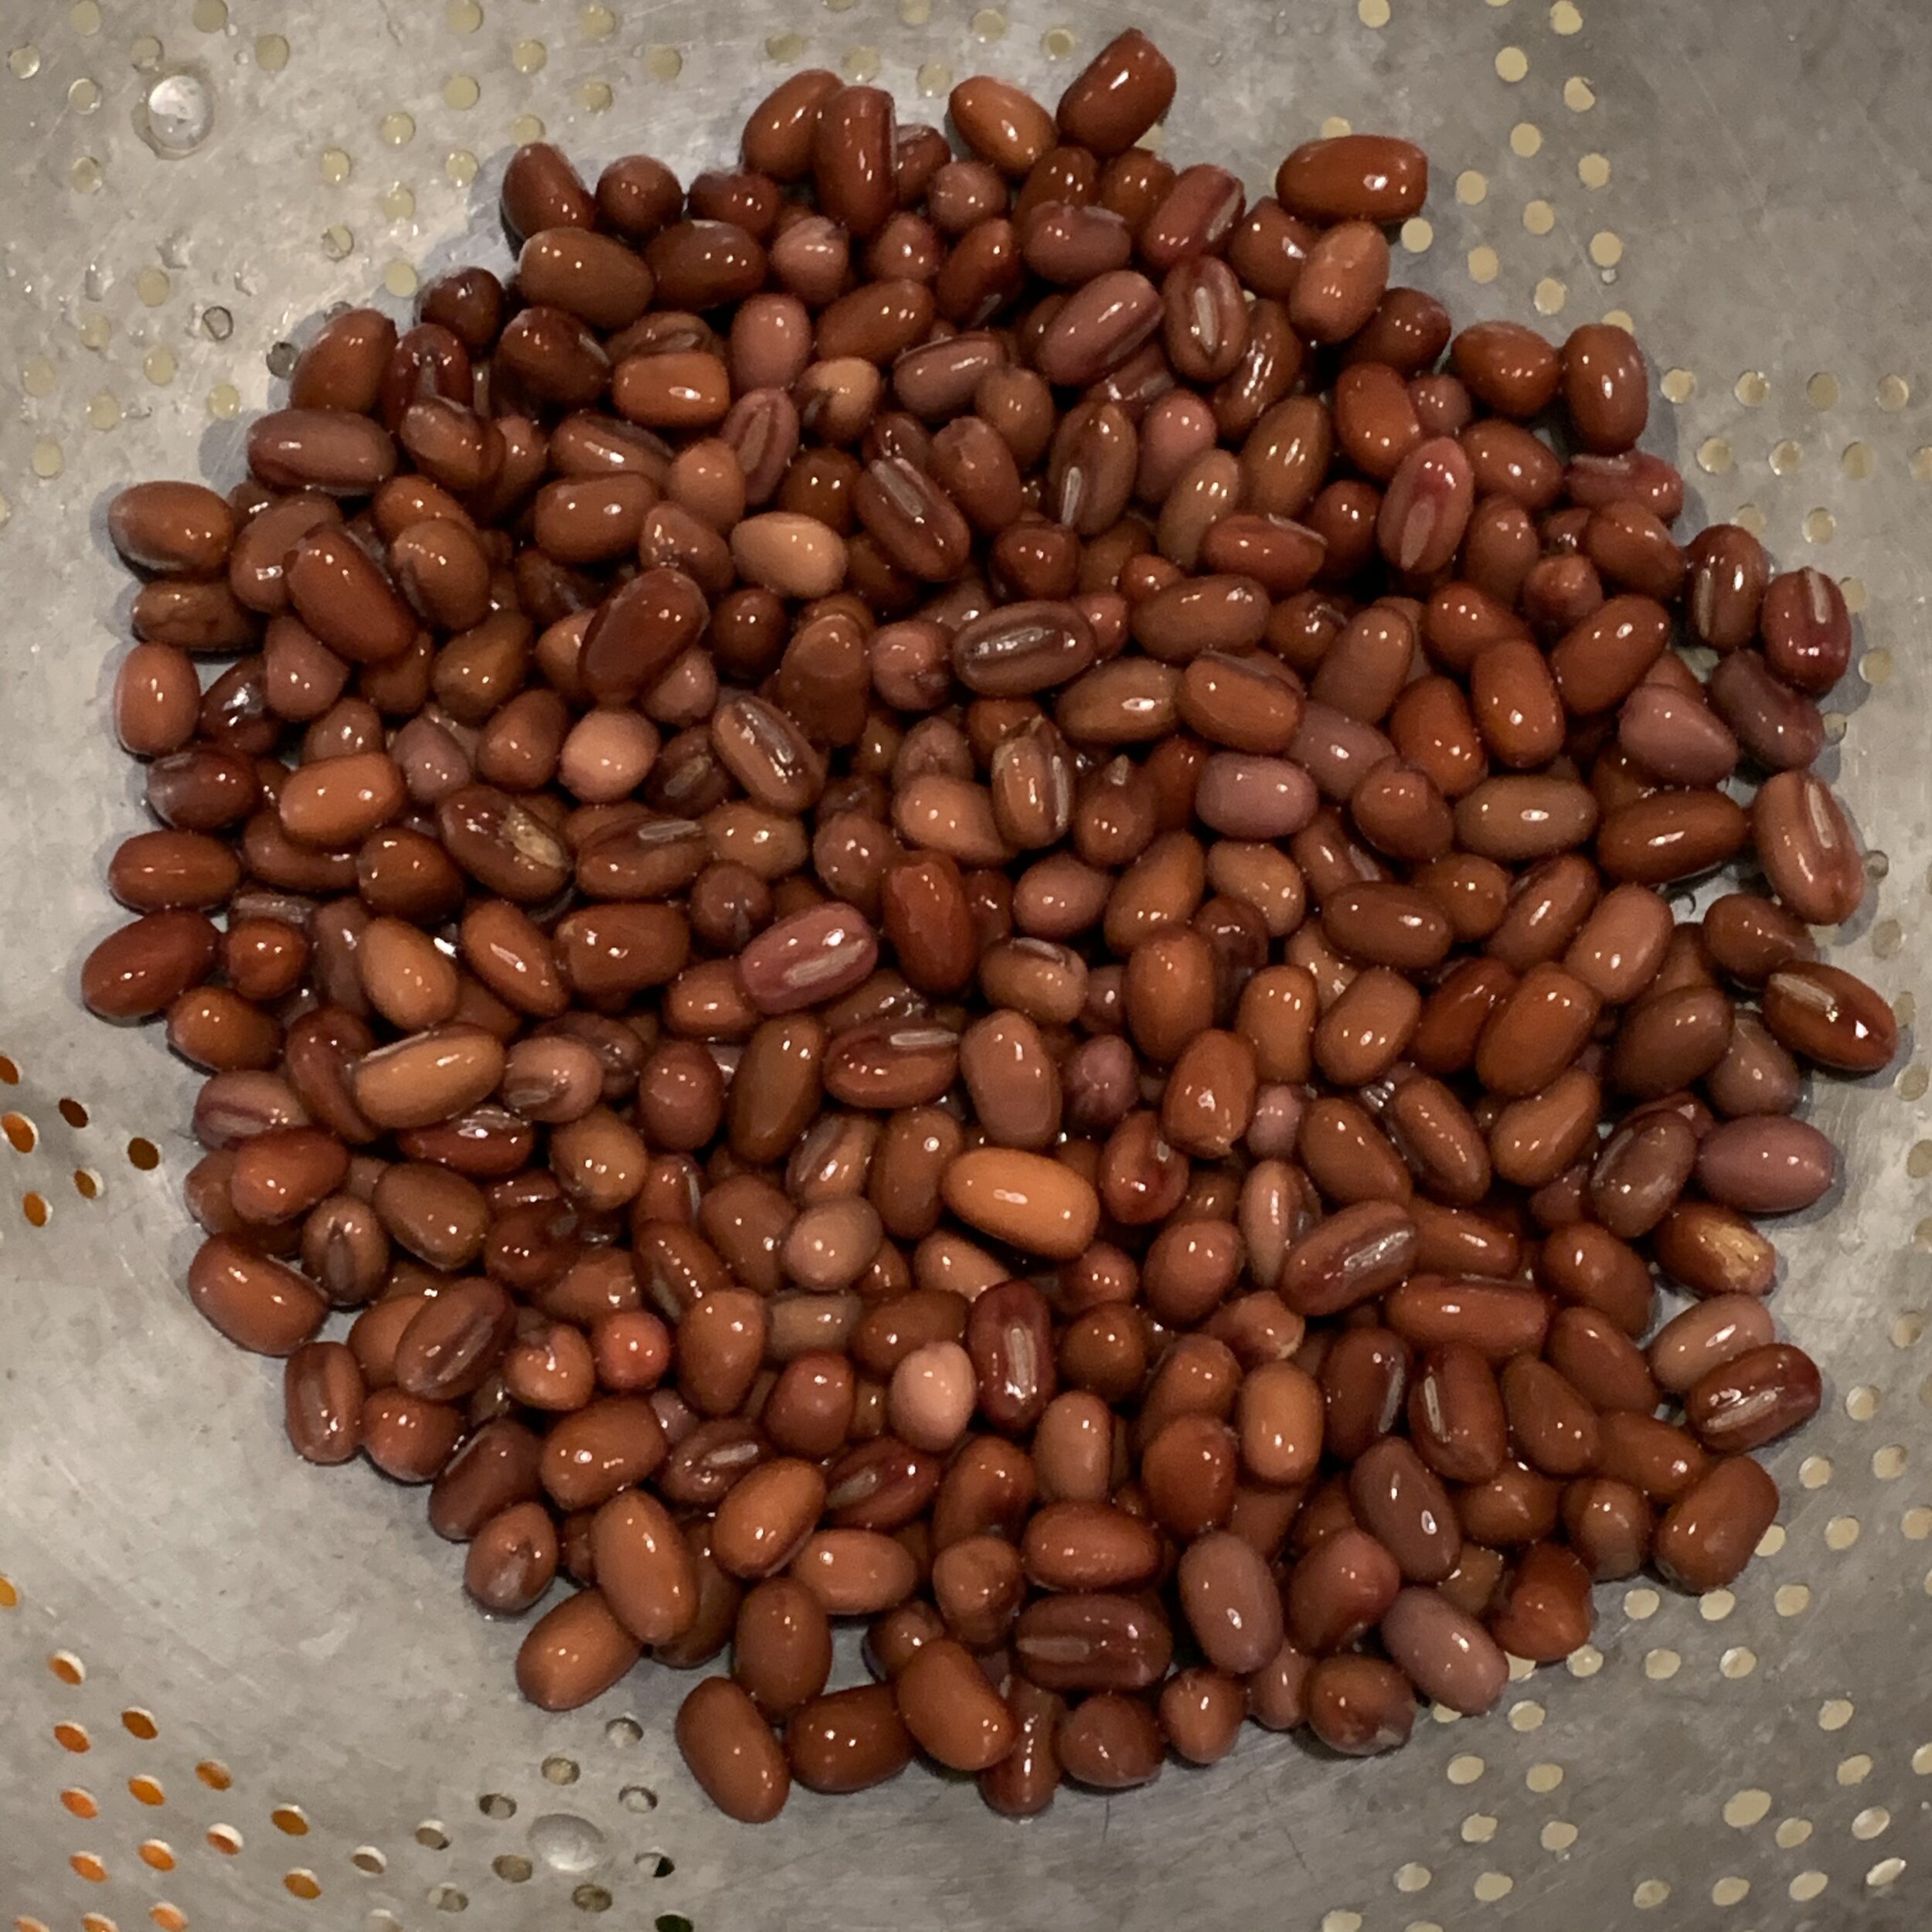 soaked beans are plump